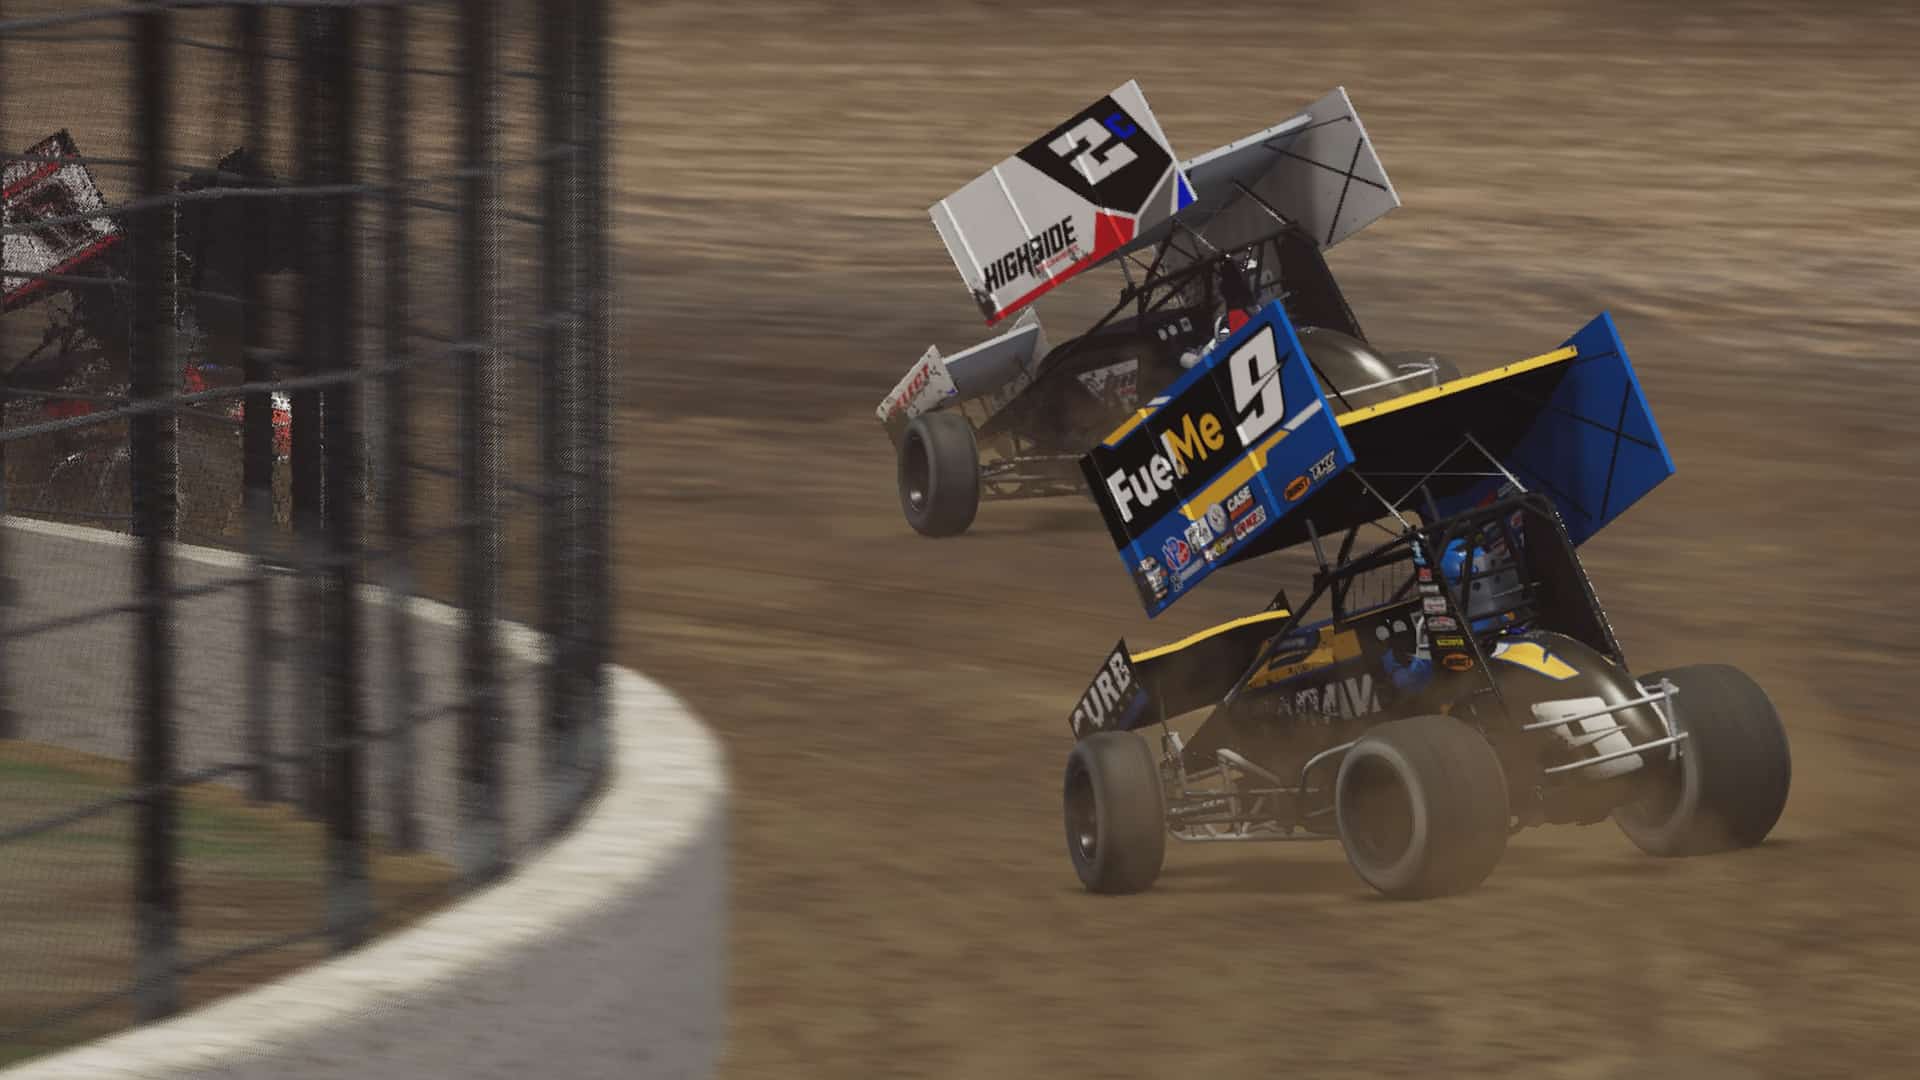 World of Outlaws: Dirt Racing dealing with issues on PlayStation 5 launch